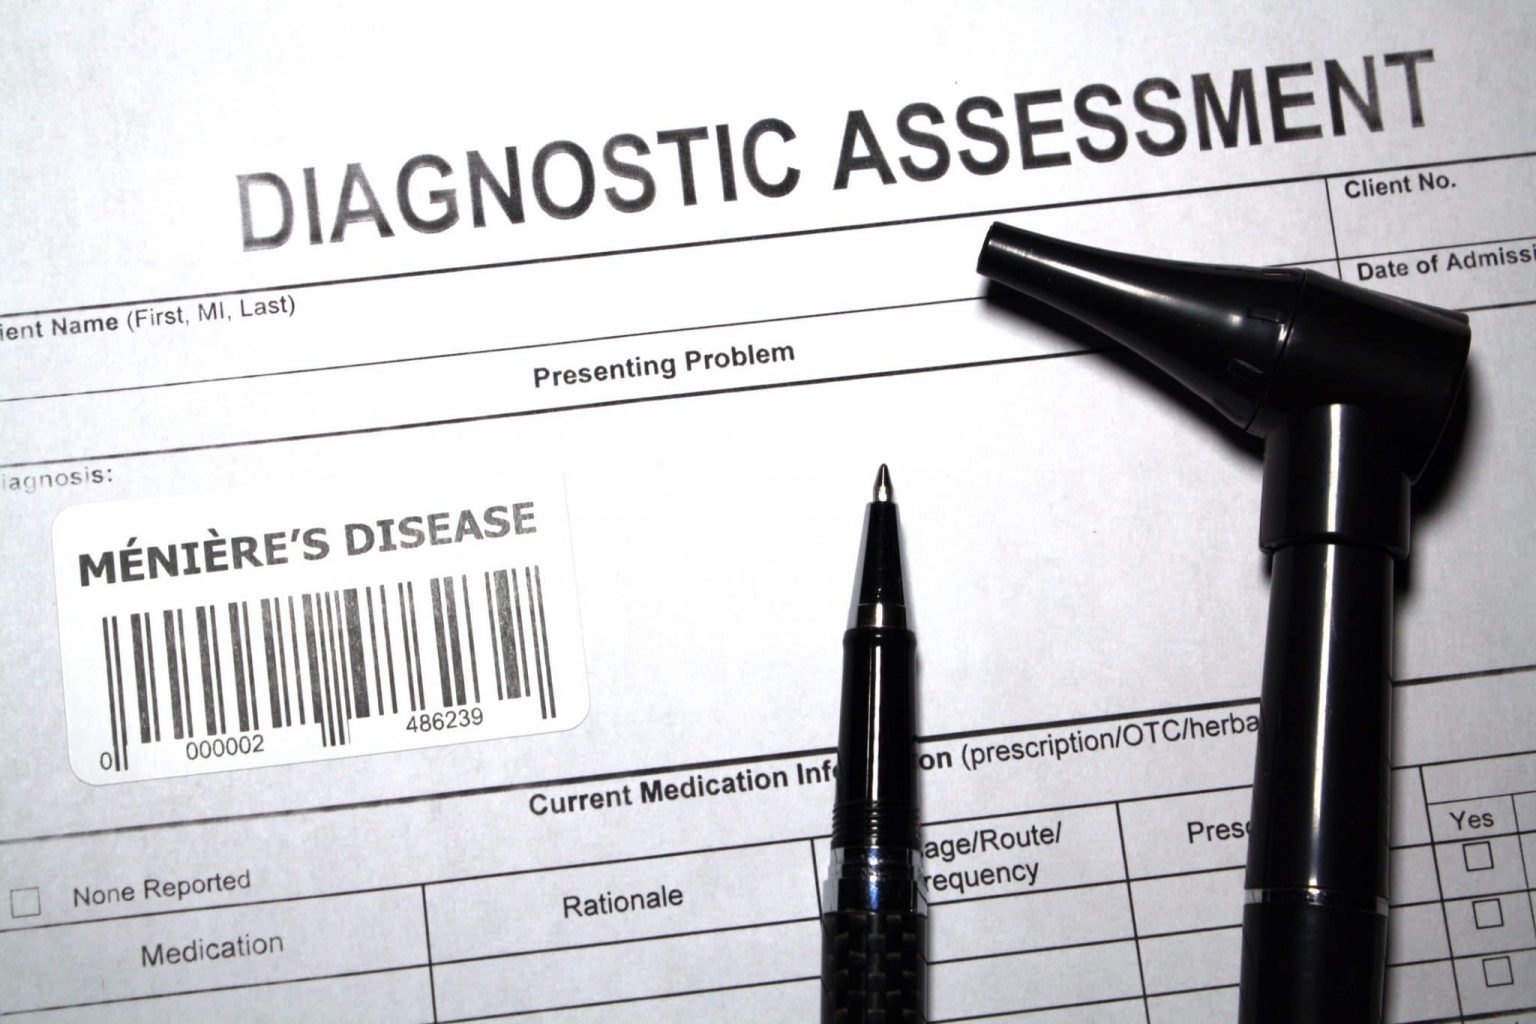 Form relating to the assessment and diagnosis of Meniere's disease